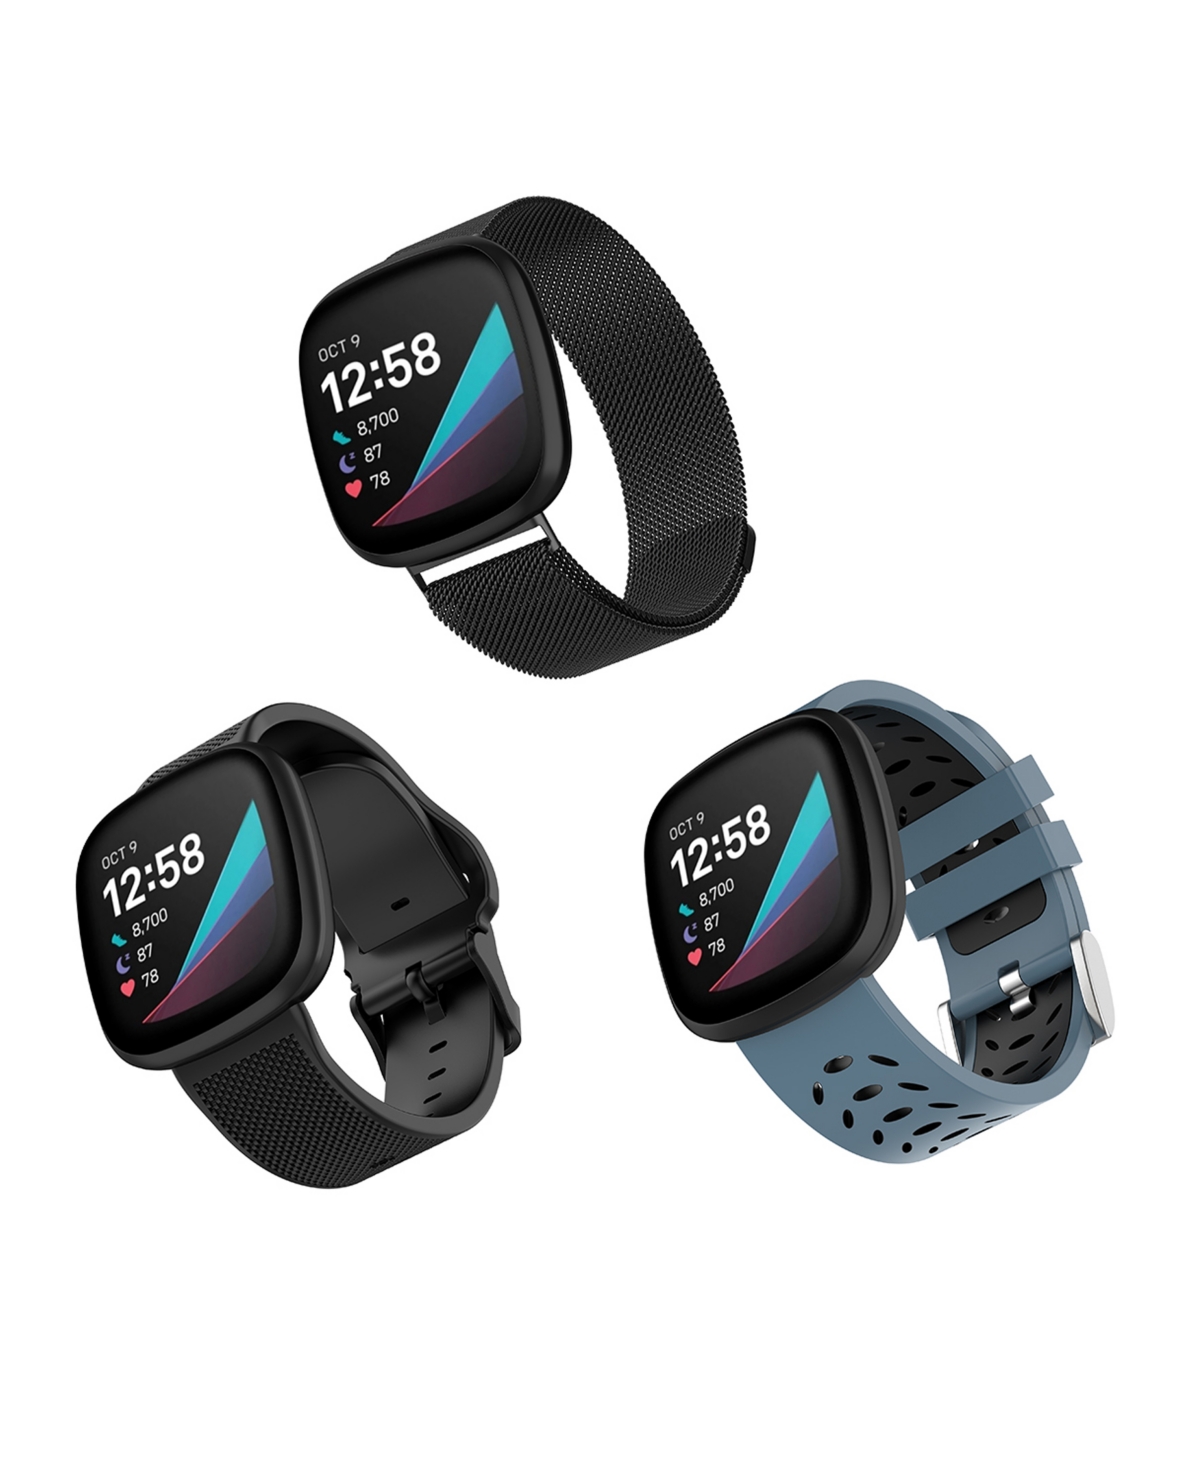 Black Stainless Steel Mesh Band, Bluestone and Black Premium Sport Silicone Band and Black Woven Silicone Band Set, 3 Pc Compatible with the Fi